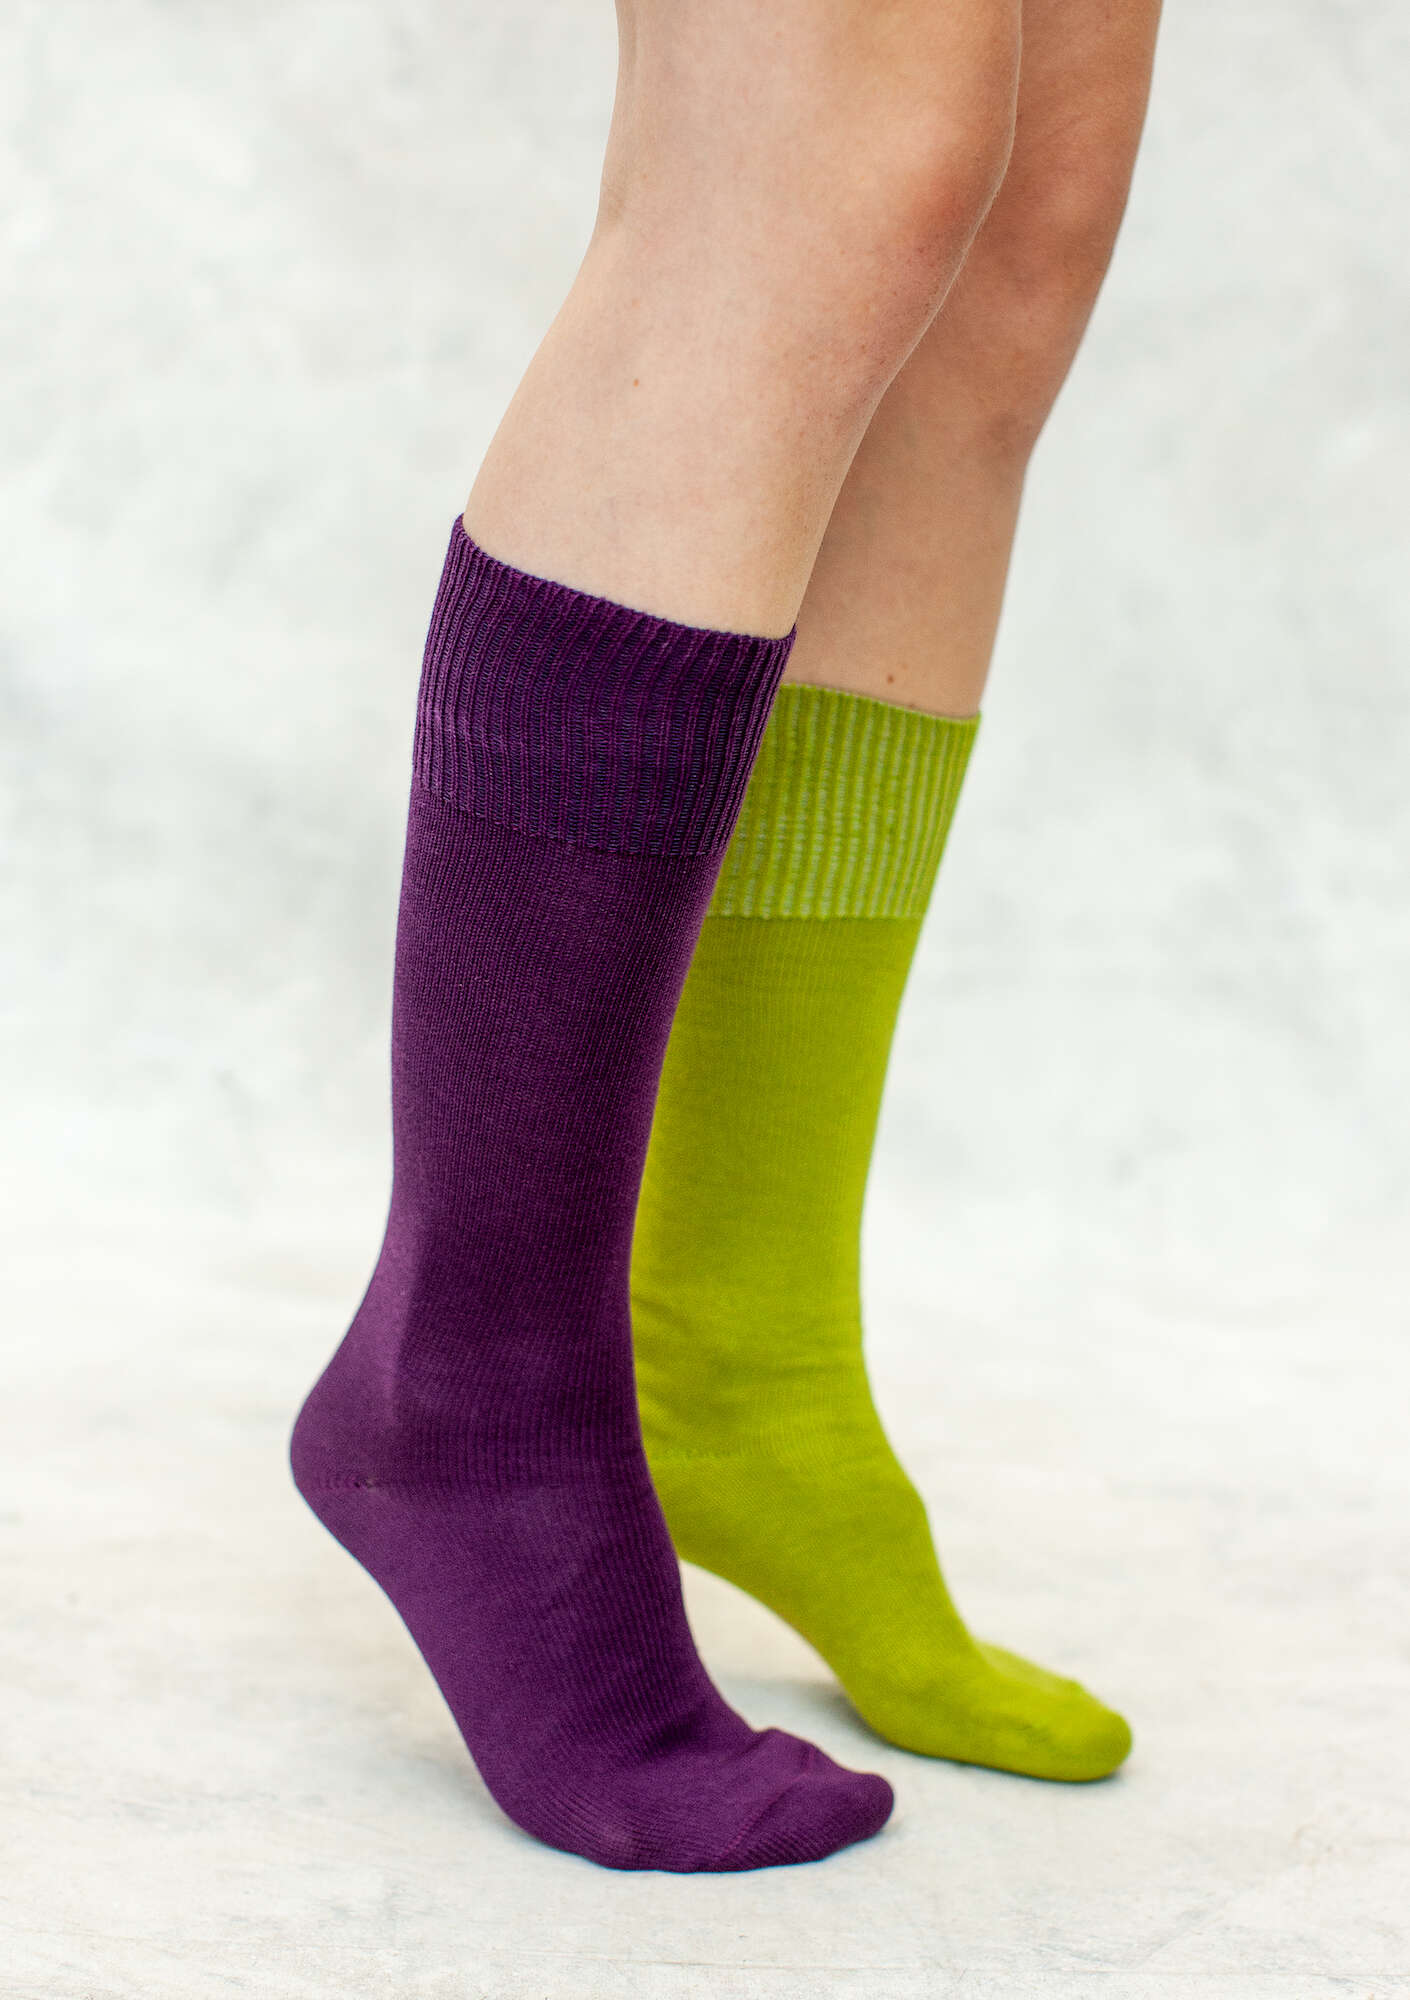 Solid-colored knee-highs in organic cotton allium